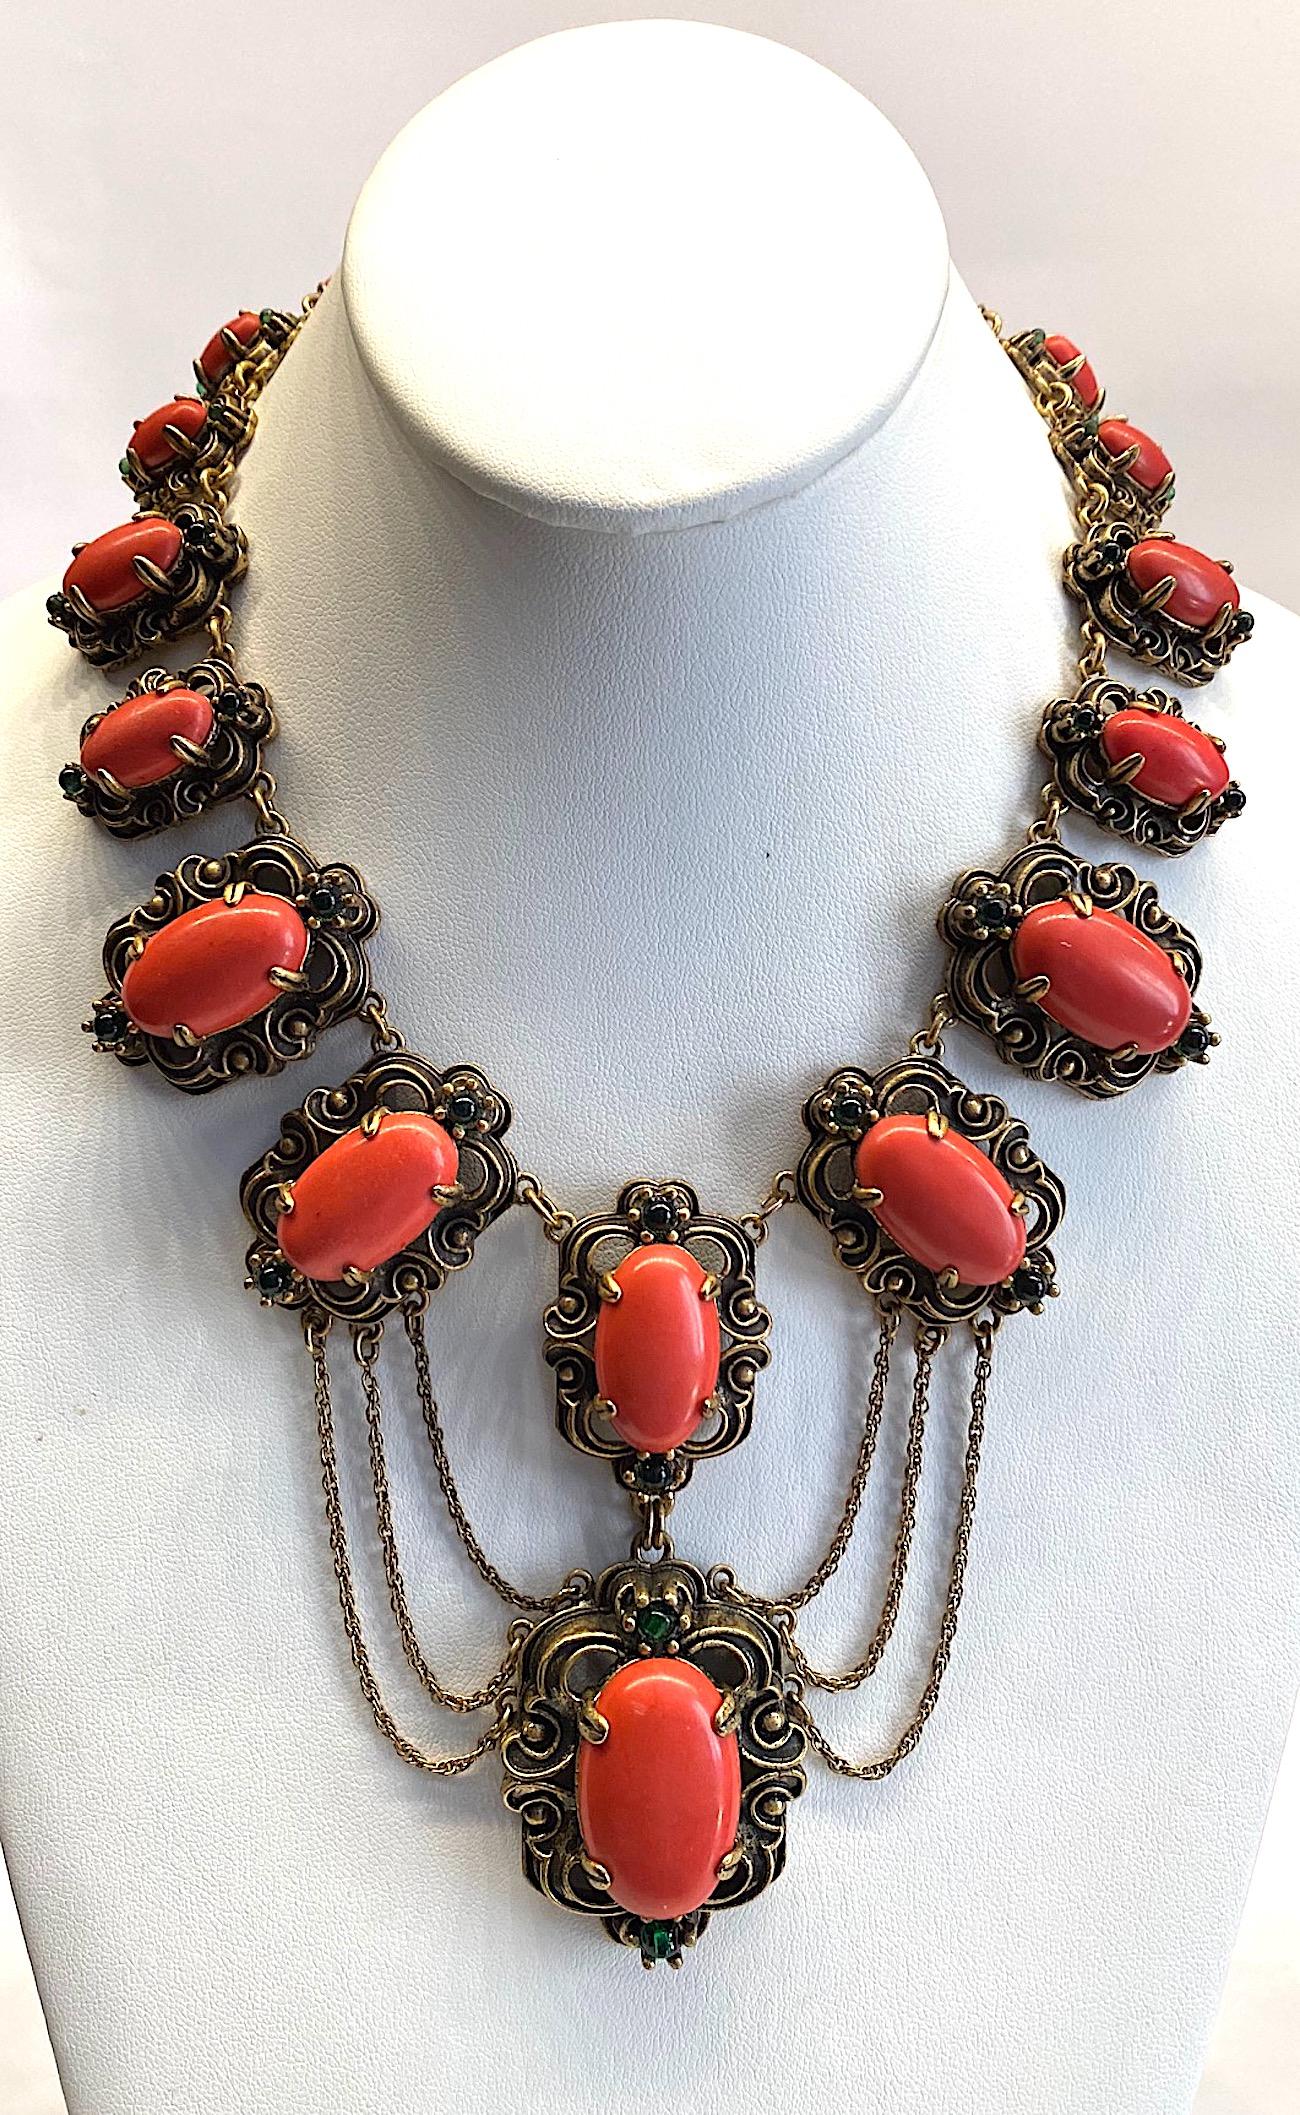 An intricate and substantial Victorian Revival necklace from the 1950s. Each of the five different size medallion links are beautifully cast in detail and patinated for an antique gold finish. Additionally, they are set with a large oval coral glass